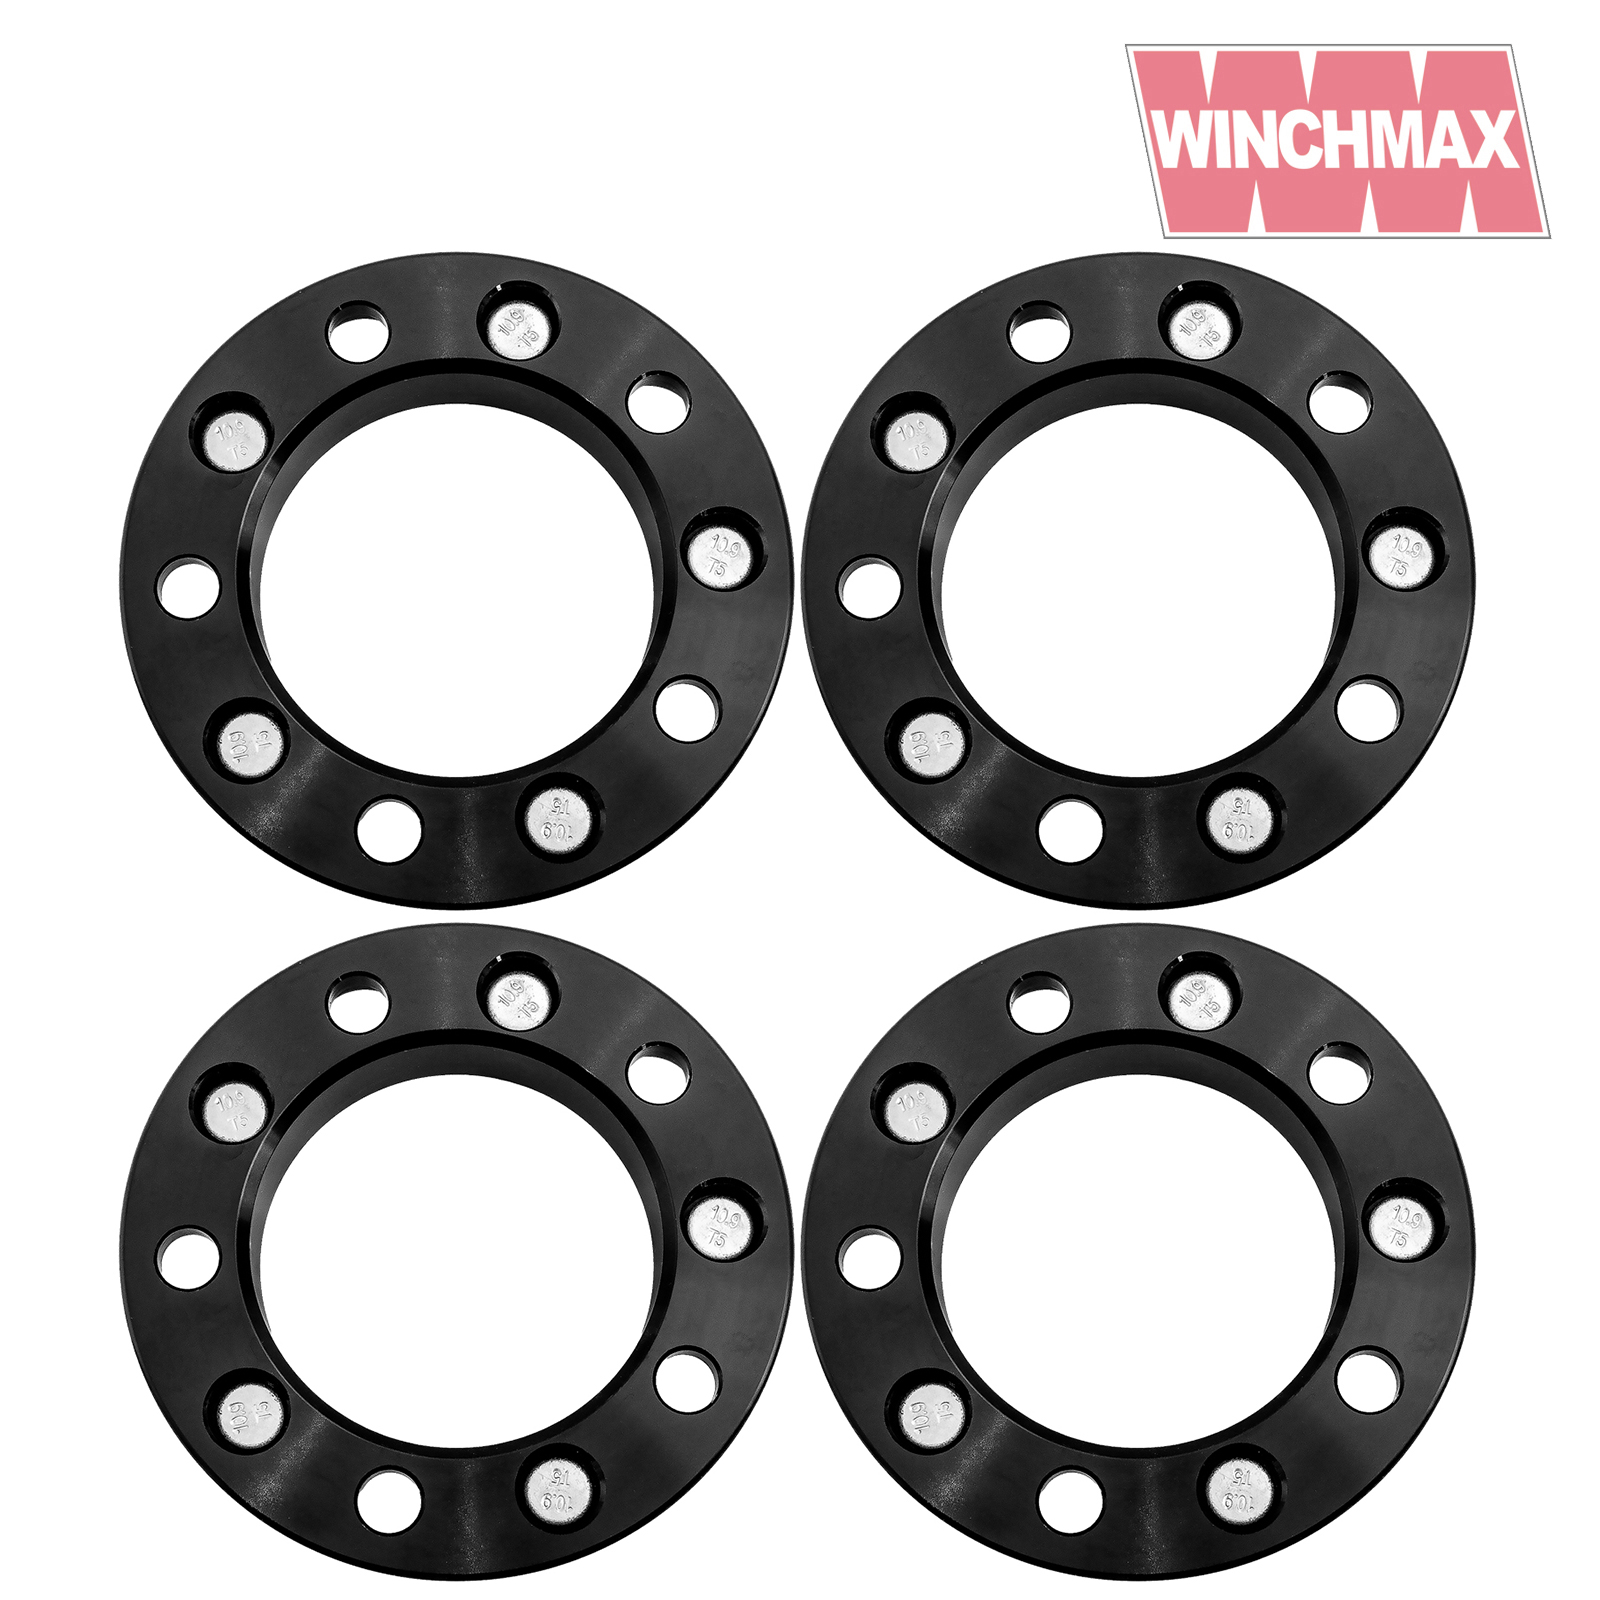 Winchmax Wheel Spacer